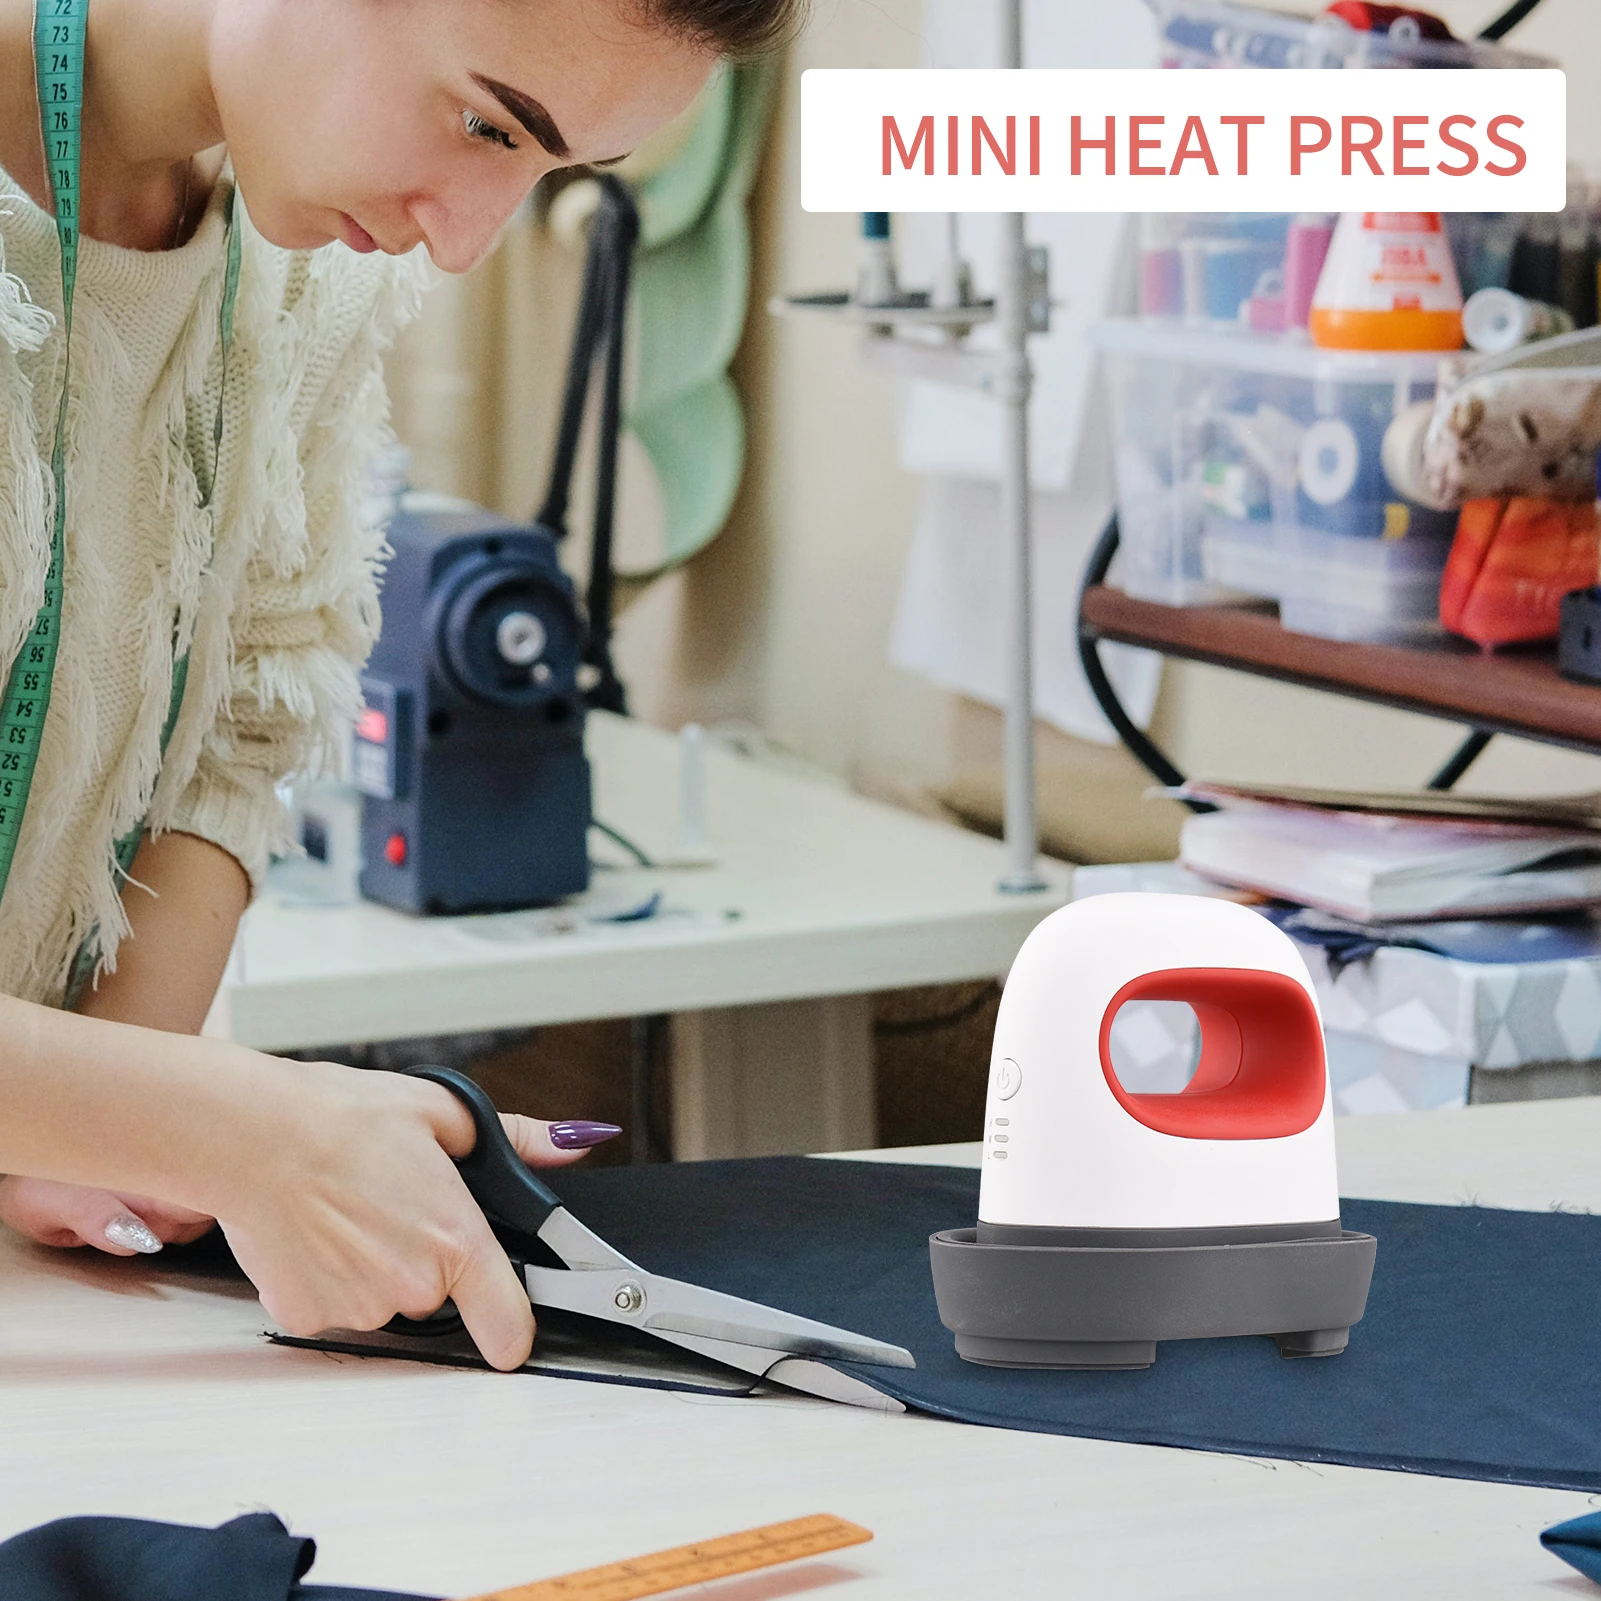 New Mini Heat Press Machine for T-Shirt Printing Easy Heating Transfer  Press Iron Machines Blanket Leather Portable DIY - red - AliExpress